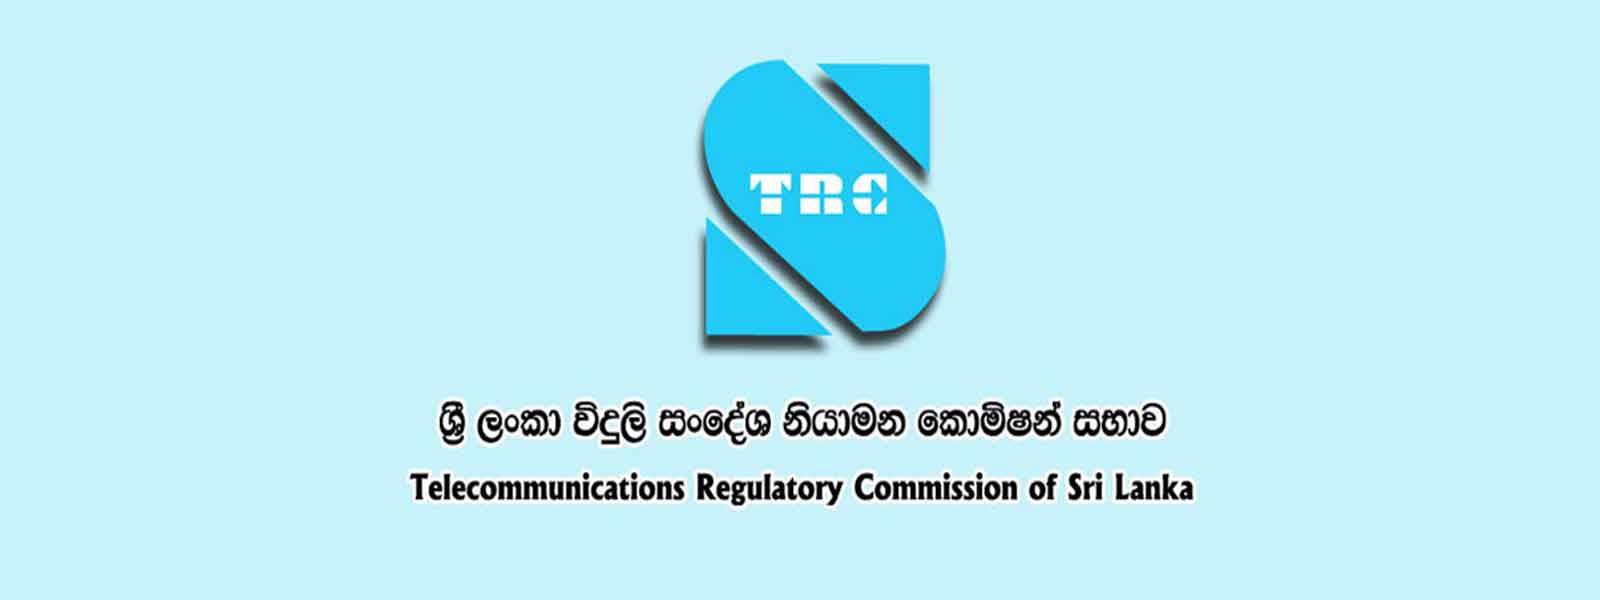 01st round of unlimited internet plans by April 2021 – TRC